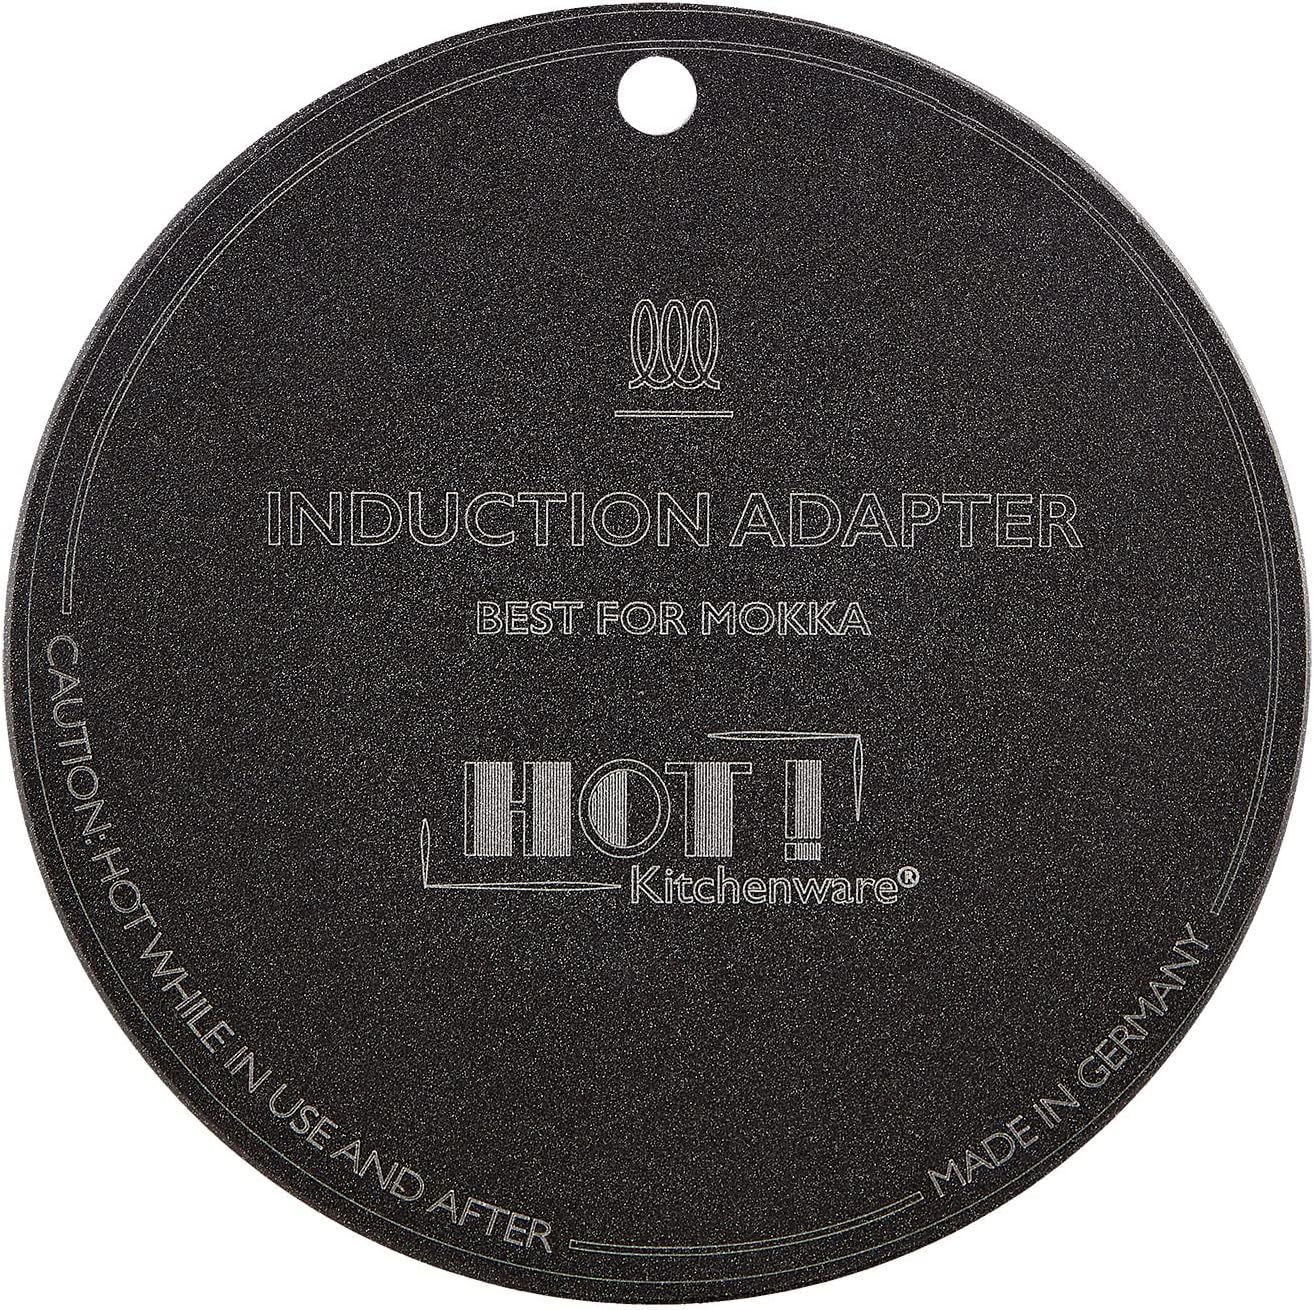 Hot! Kitchenware Induction Adaptor Plate for Espresso Maker, 100% Made in Germany, Size: 12 cm